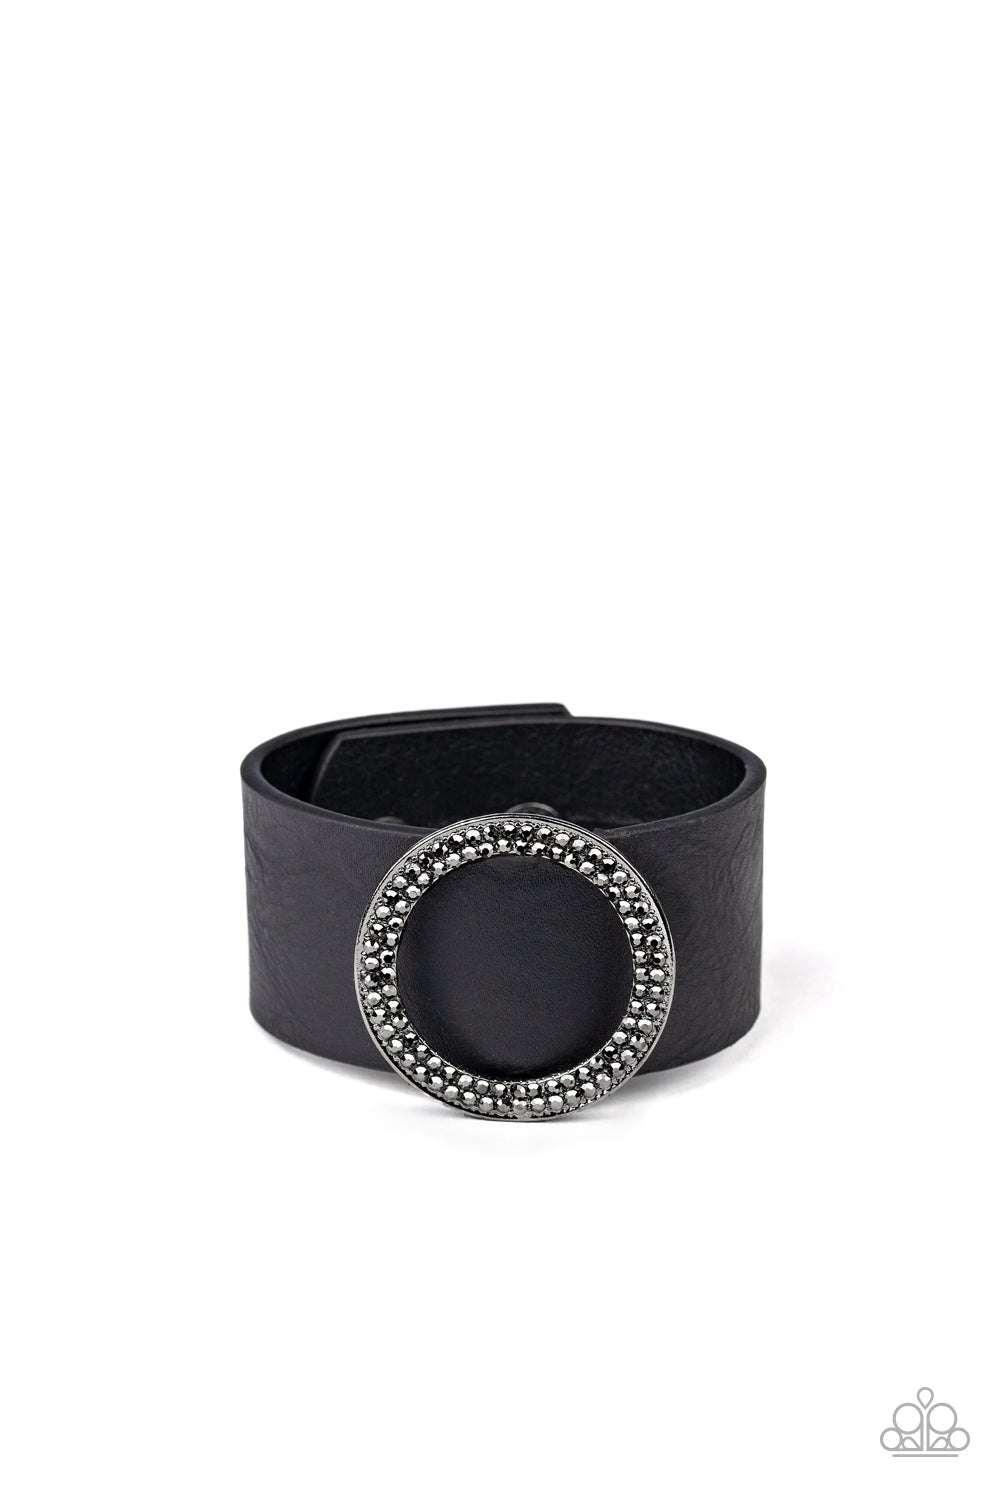 RING Them In - Black - Spiffy Chick Jewelry